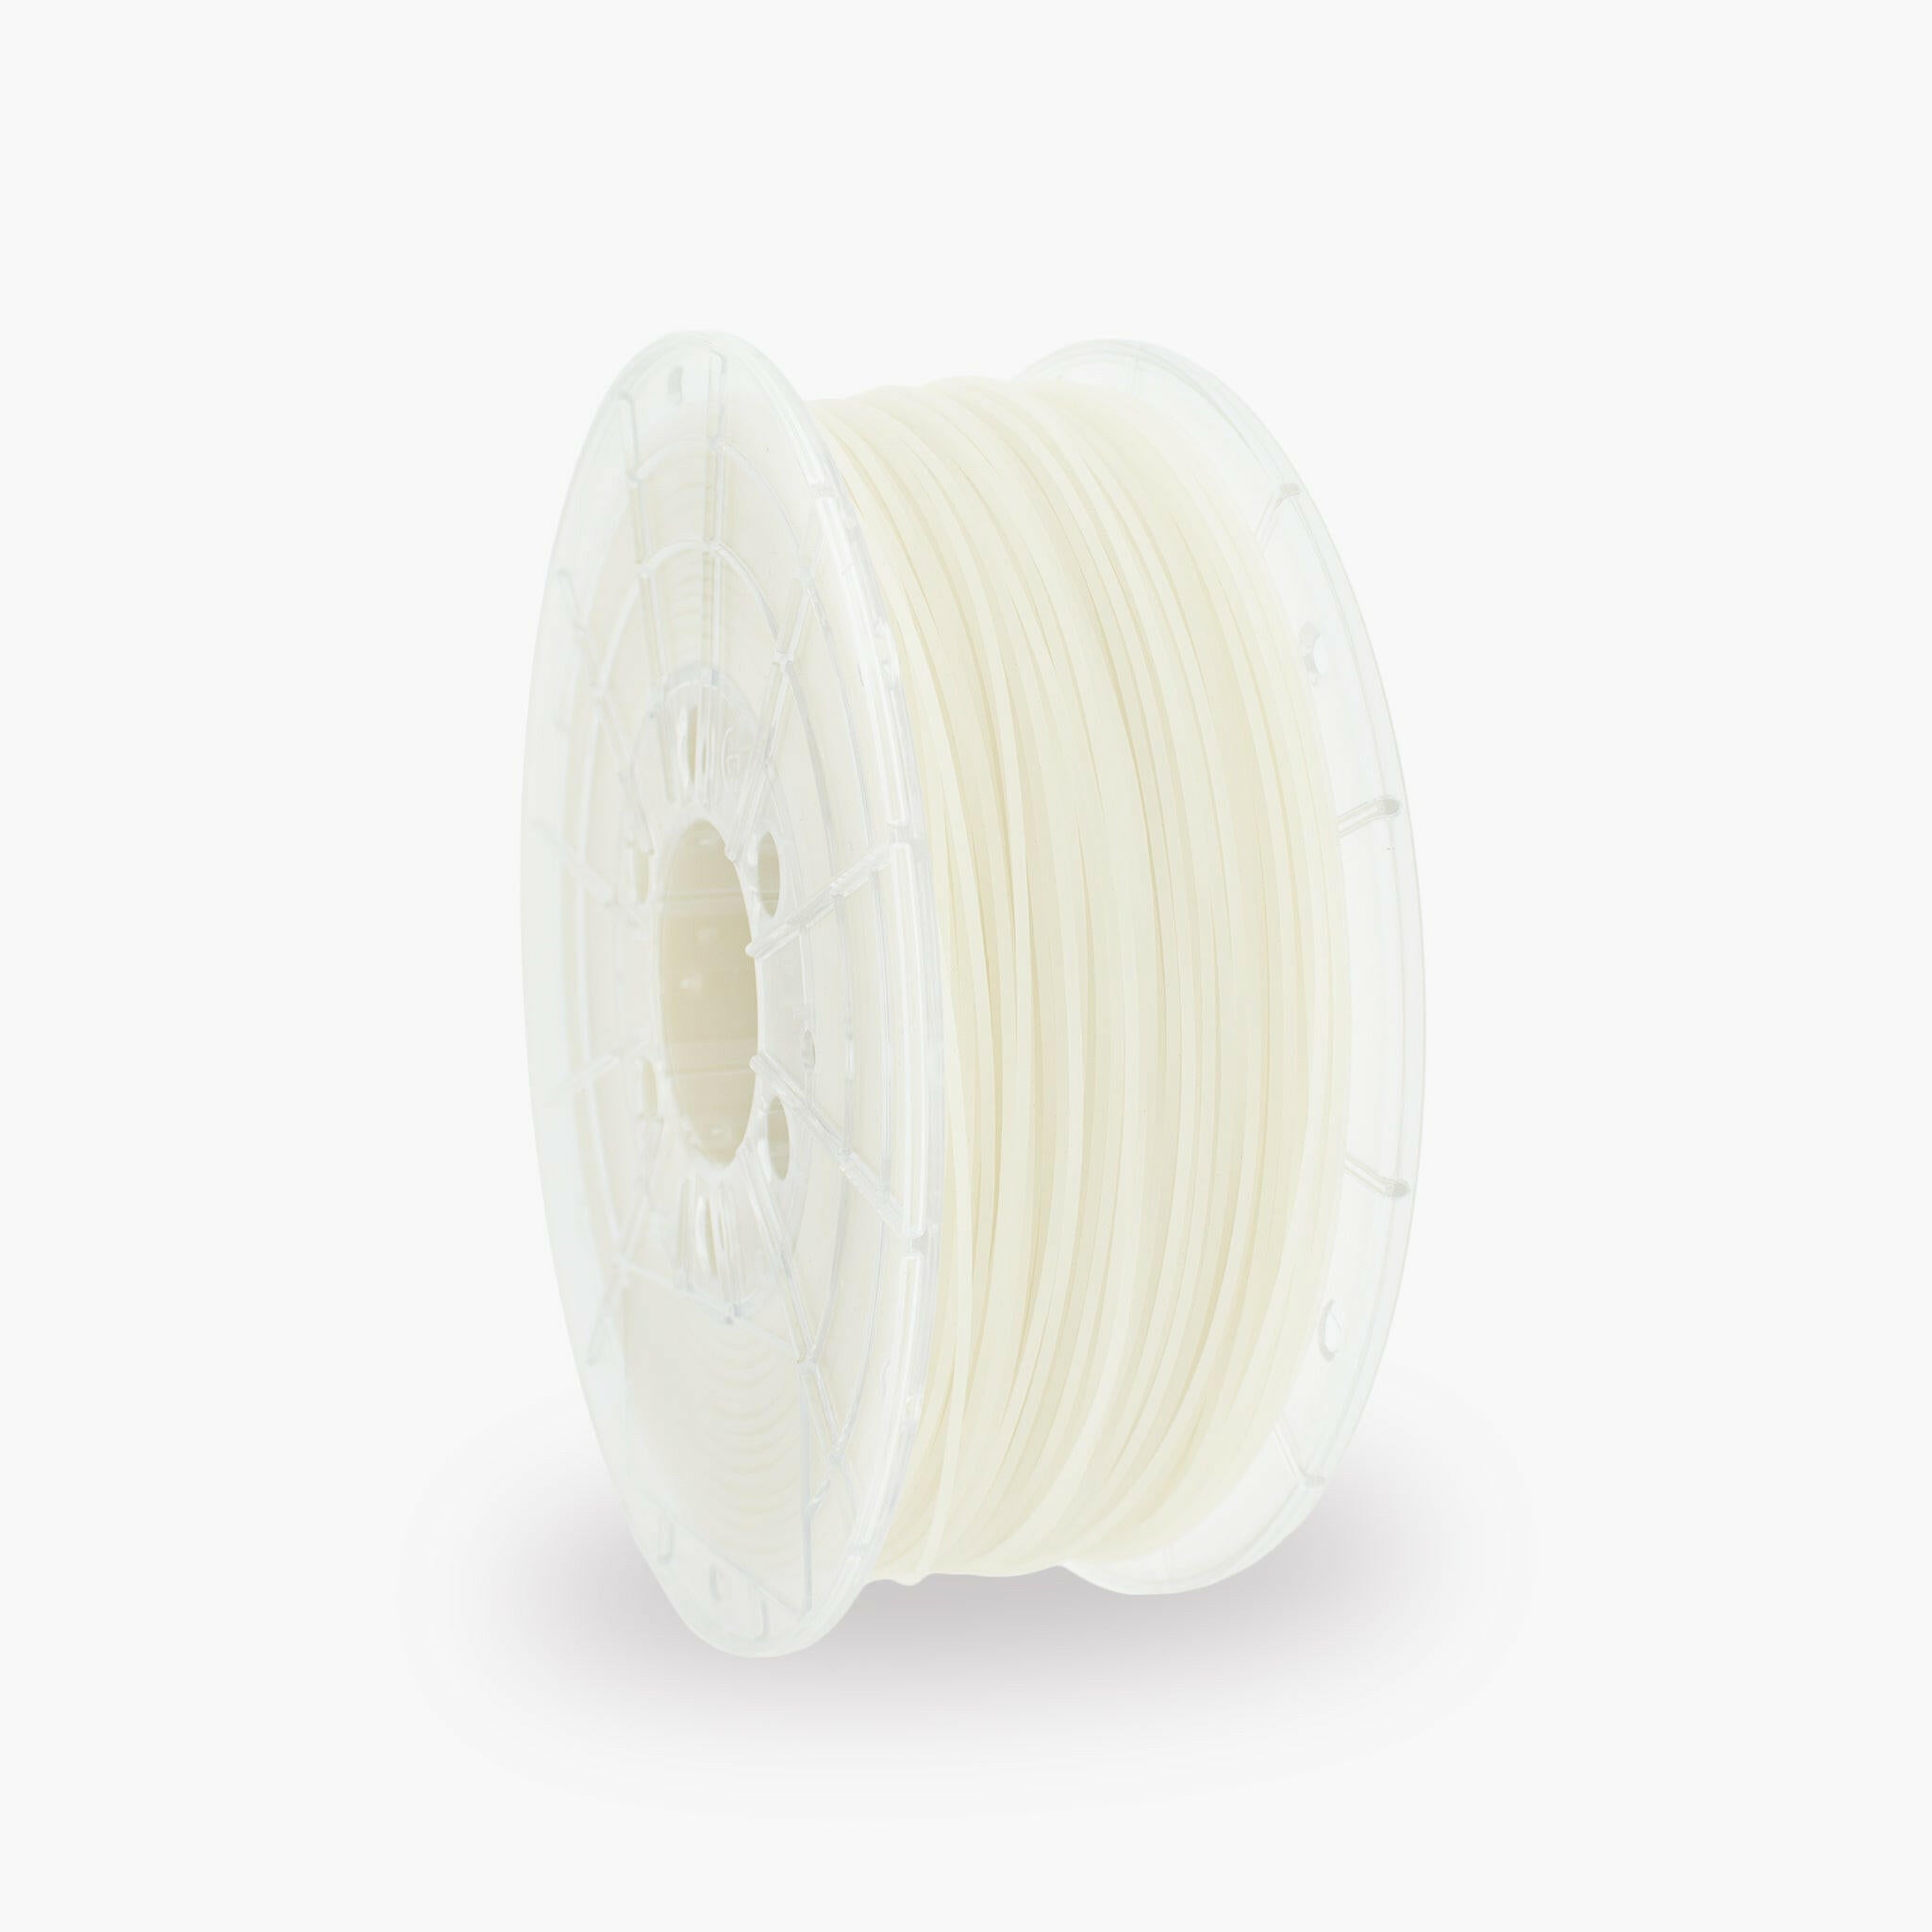 Glow in the dark PLA 3D Printer Filament with a diameter of 1.75mm on a 1KG Spool.